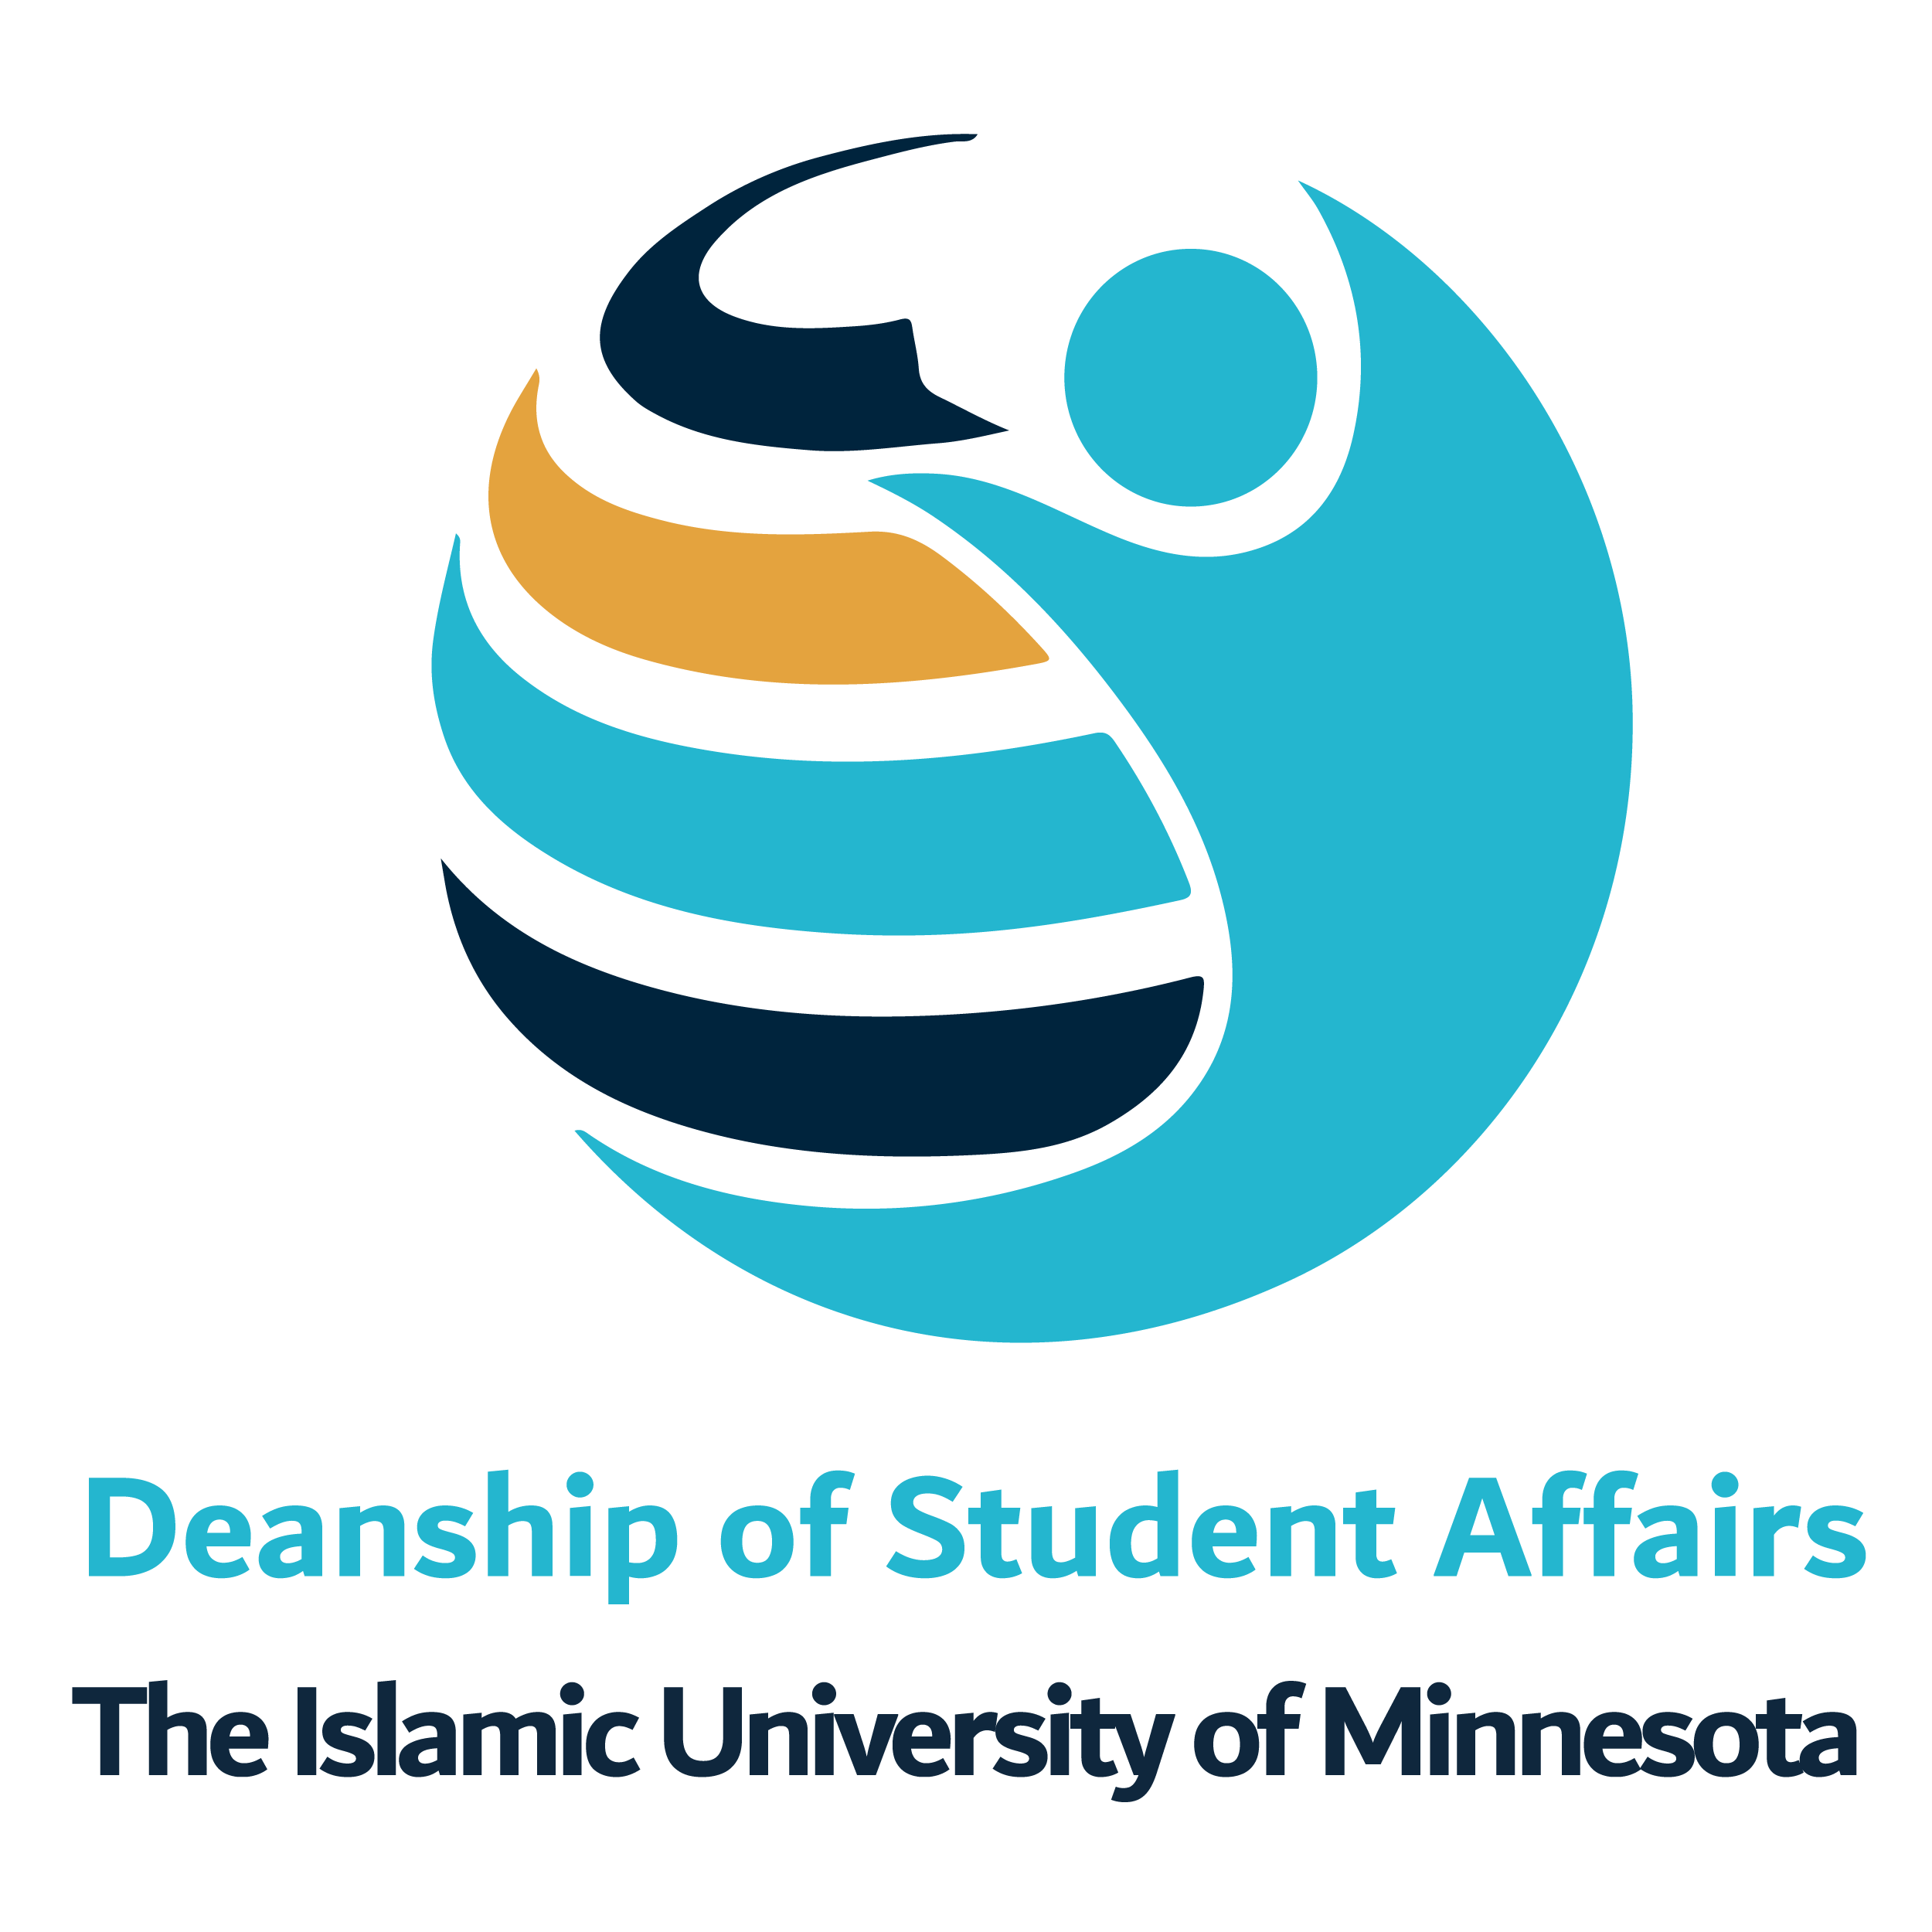 Deanship of Student Affairs